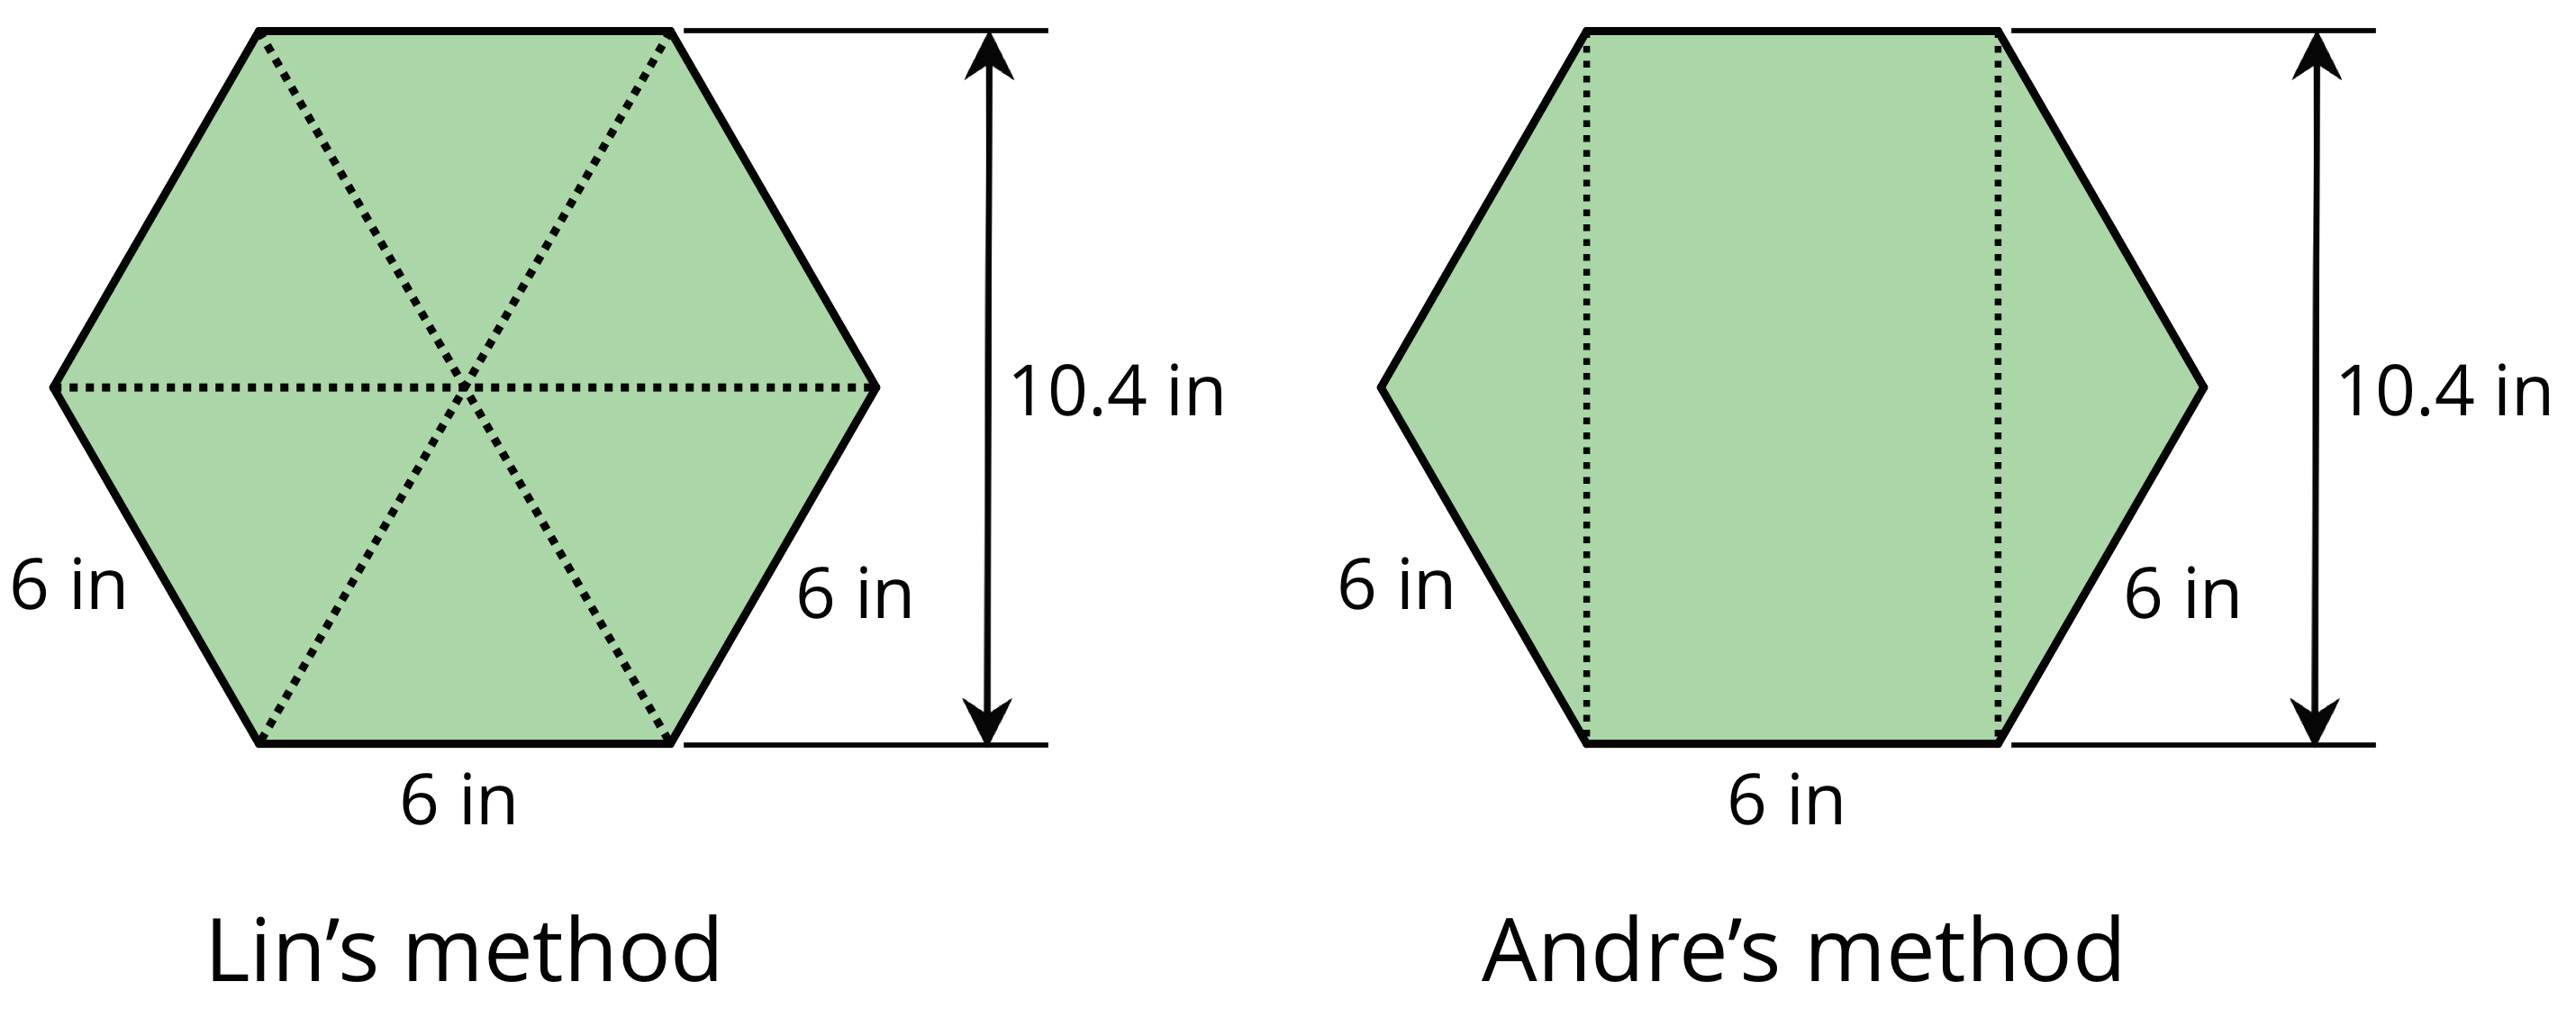 Two identical hexagons labeled “Lin’s method” and “Andre’s method”.  Each hexagon has three sides labeled 6 inches and an arrow indicating total height labeled 10.4 inches. “Lin’s method” is divided into six equal triangles, and Andre’s method is decomposed into a rectangle made of lines extending from one side to the opposite side, with a triangle on either side of the rectangle.